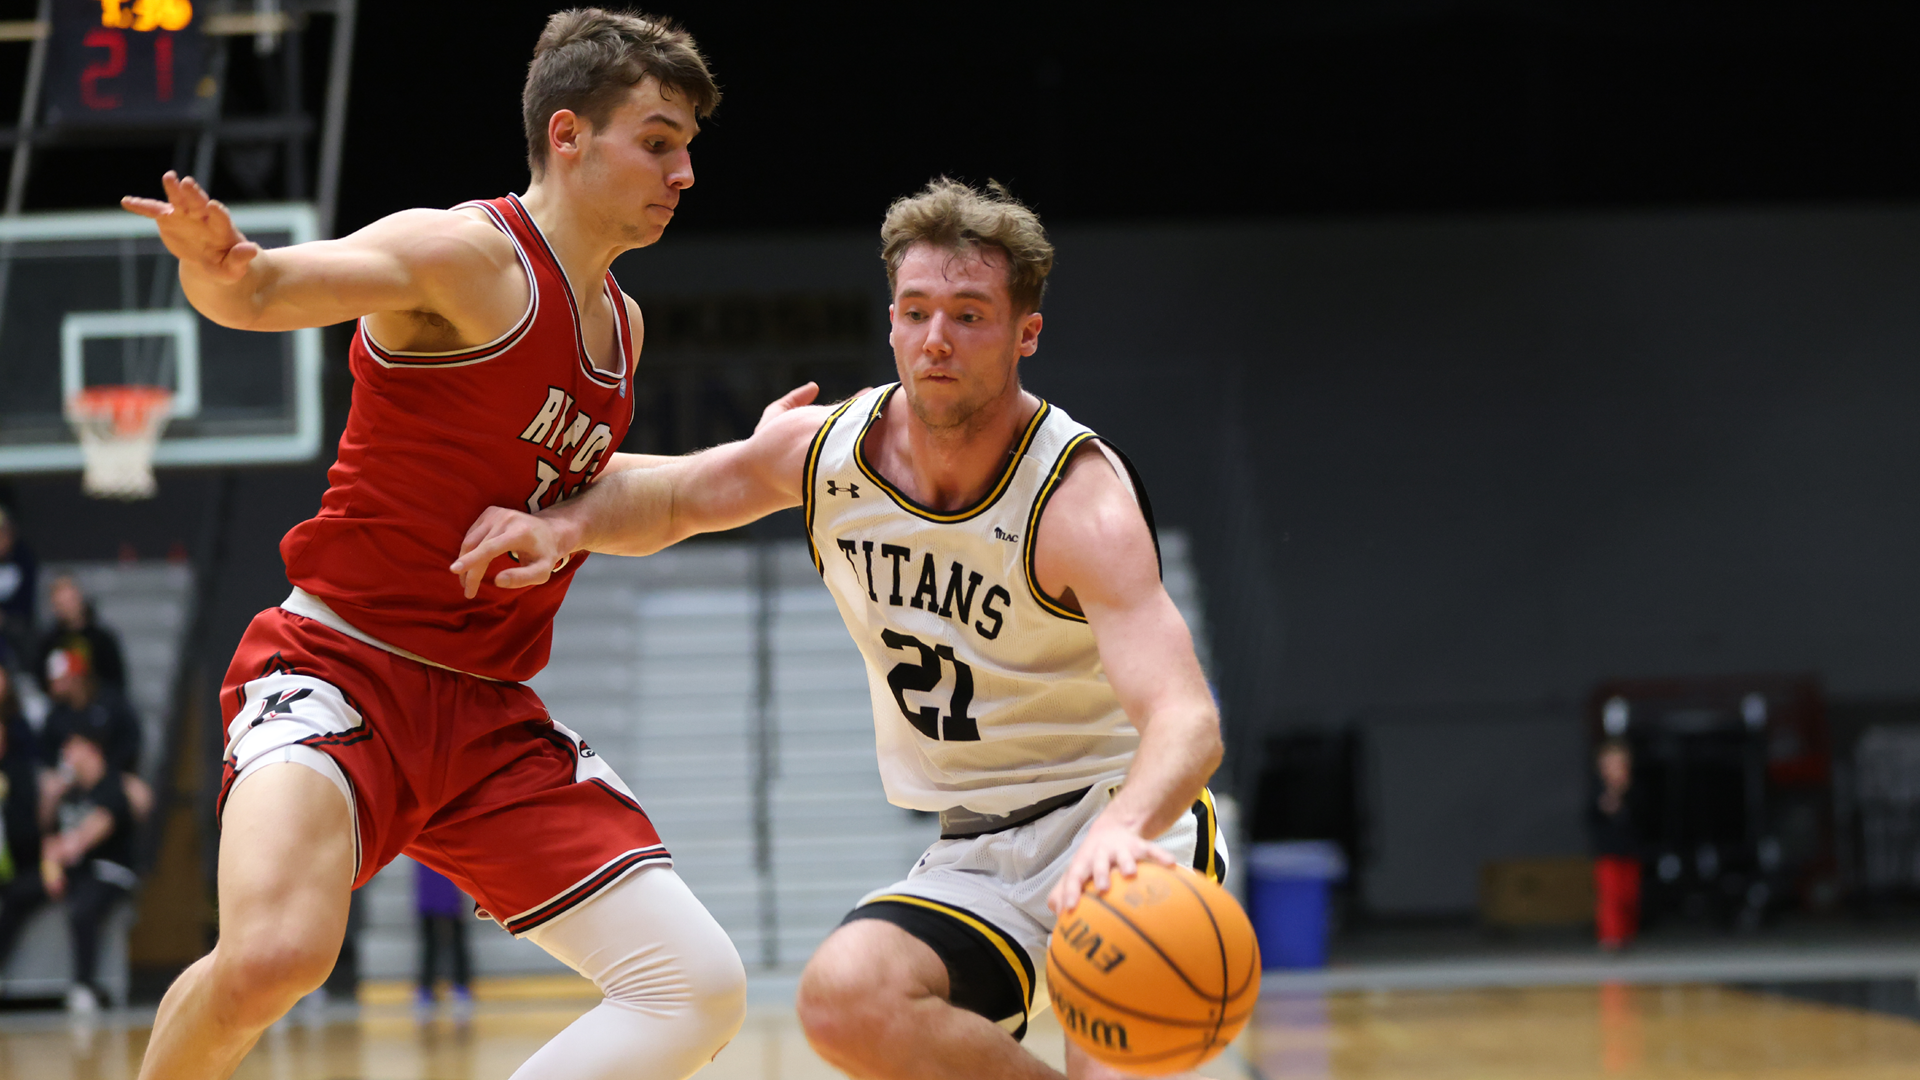 Carter Thomas scored a career-high 29 points in the Titans' 84-60 win over Ripon College on Monday